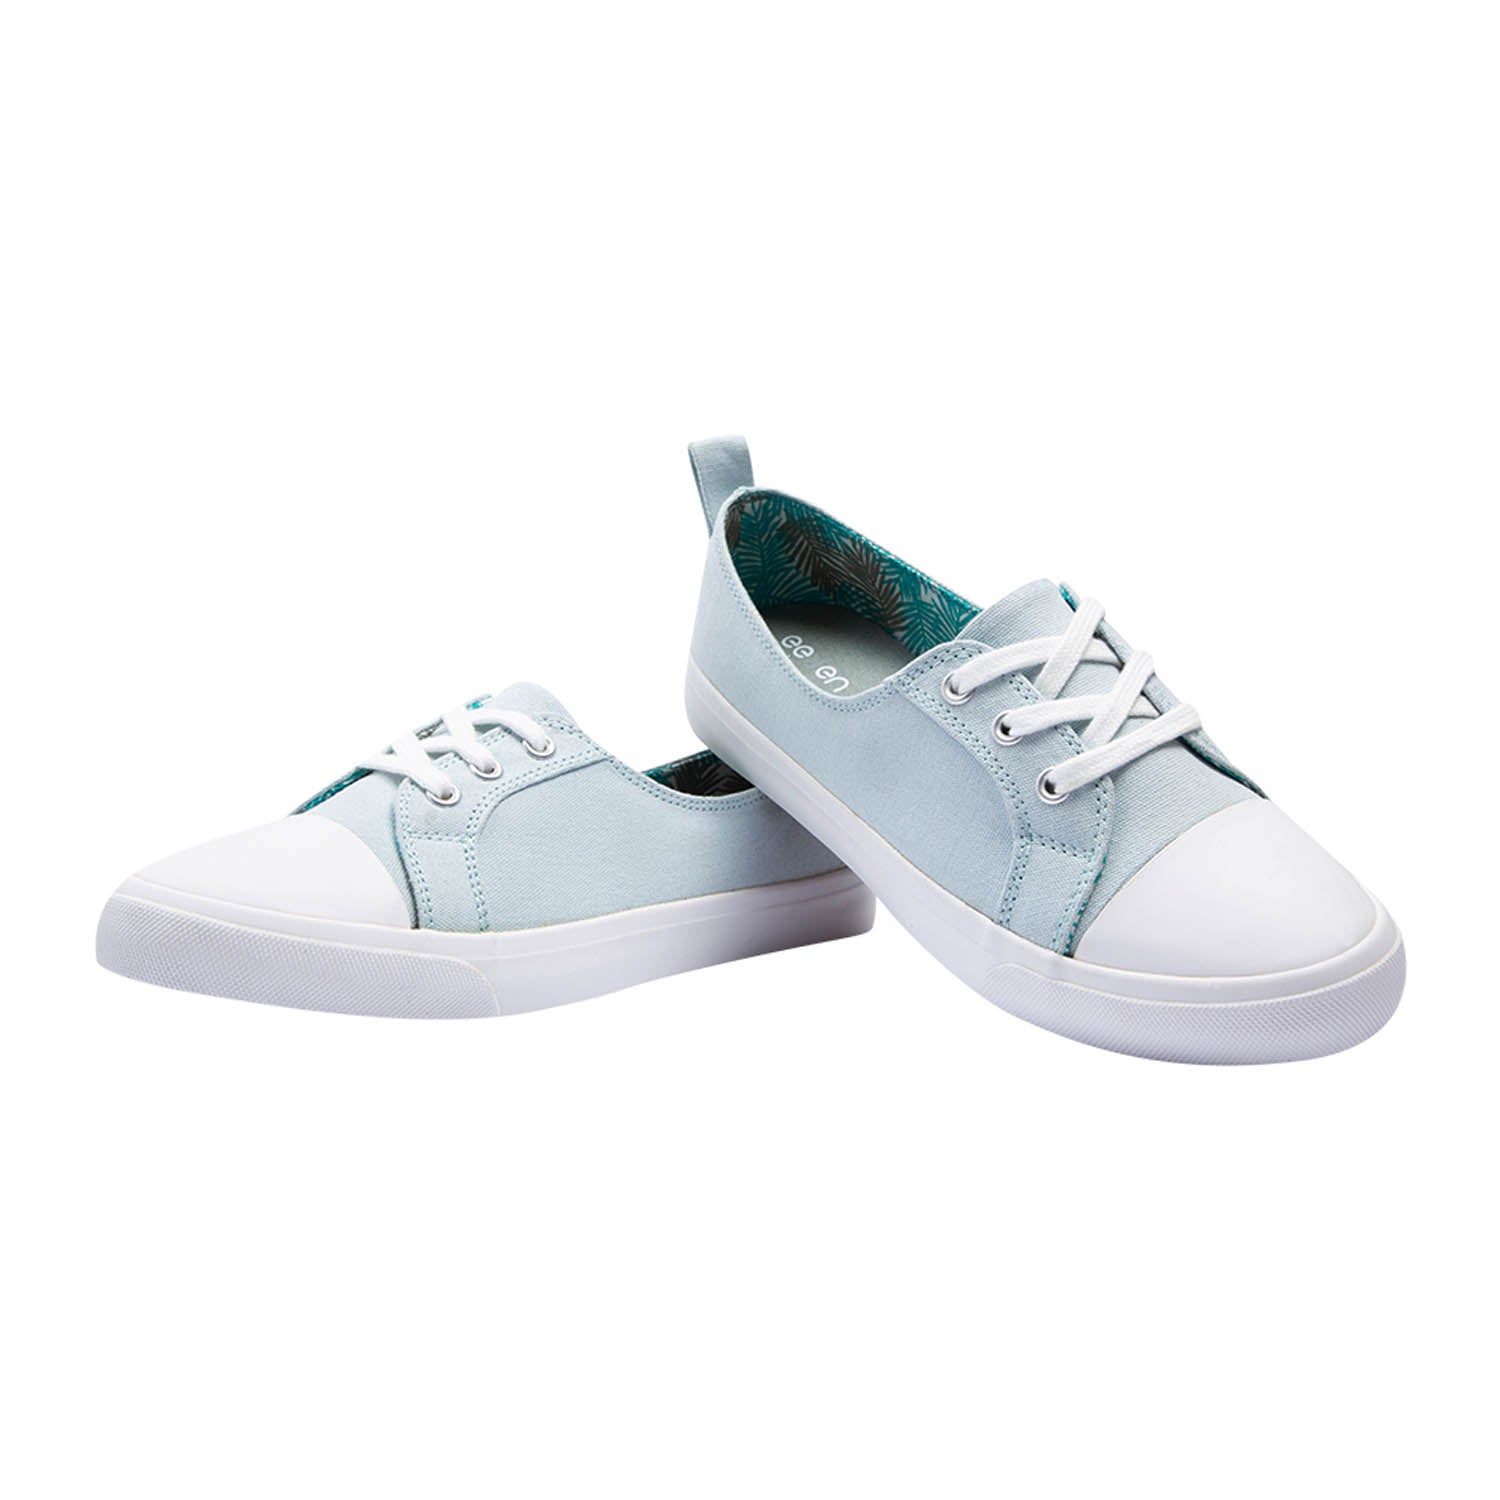 Eeken Crony From The House Of Paragon Canvas Shoes For Women (Blue)